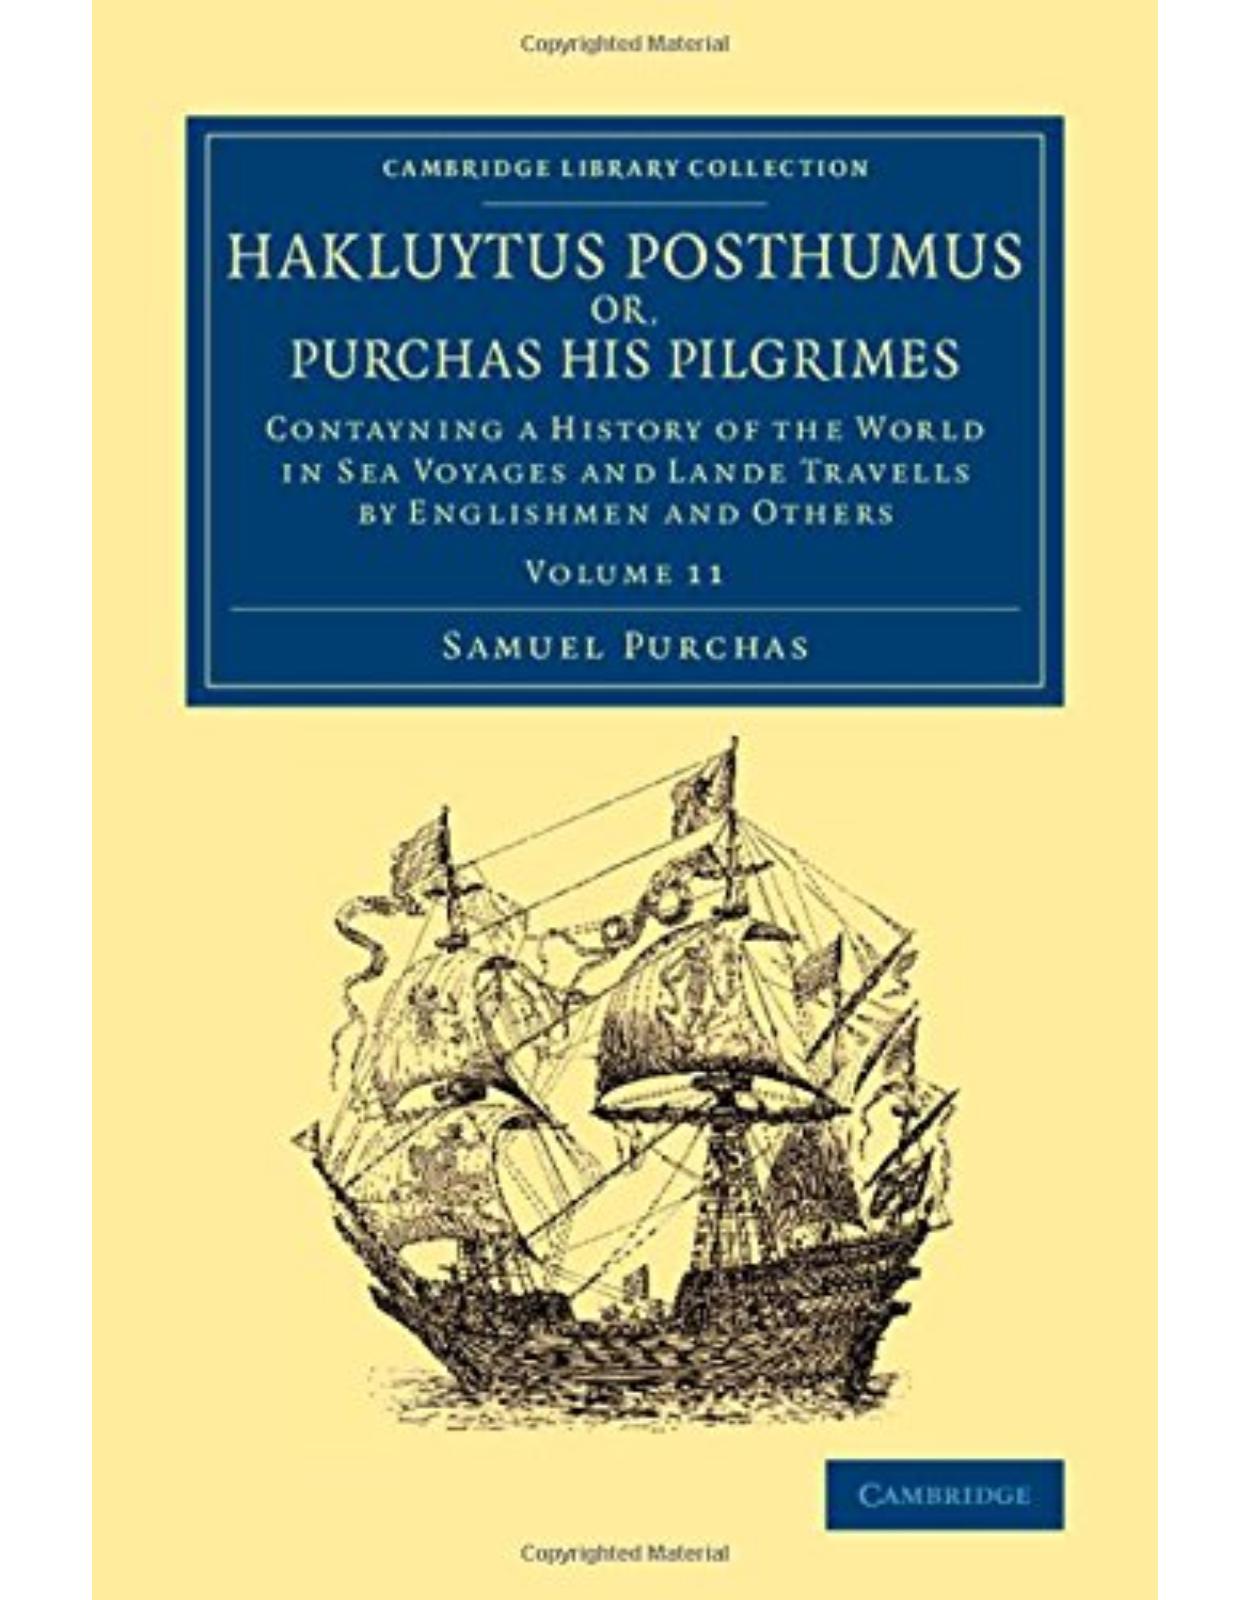 Hakluytus Posthumus or, Purchas his Pilgrimes: Contayning a History of the World in Sea Voyages and Lande Travells by Englishmen and Others (Volume 11)